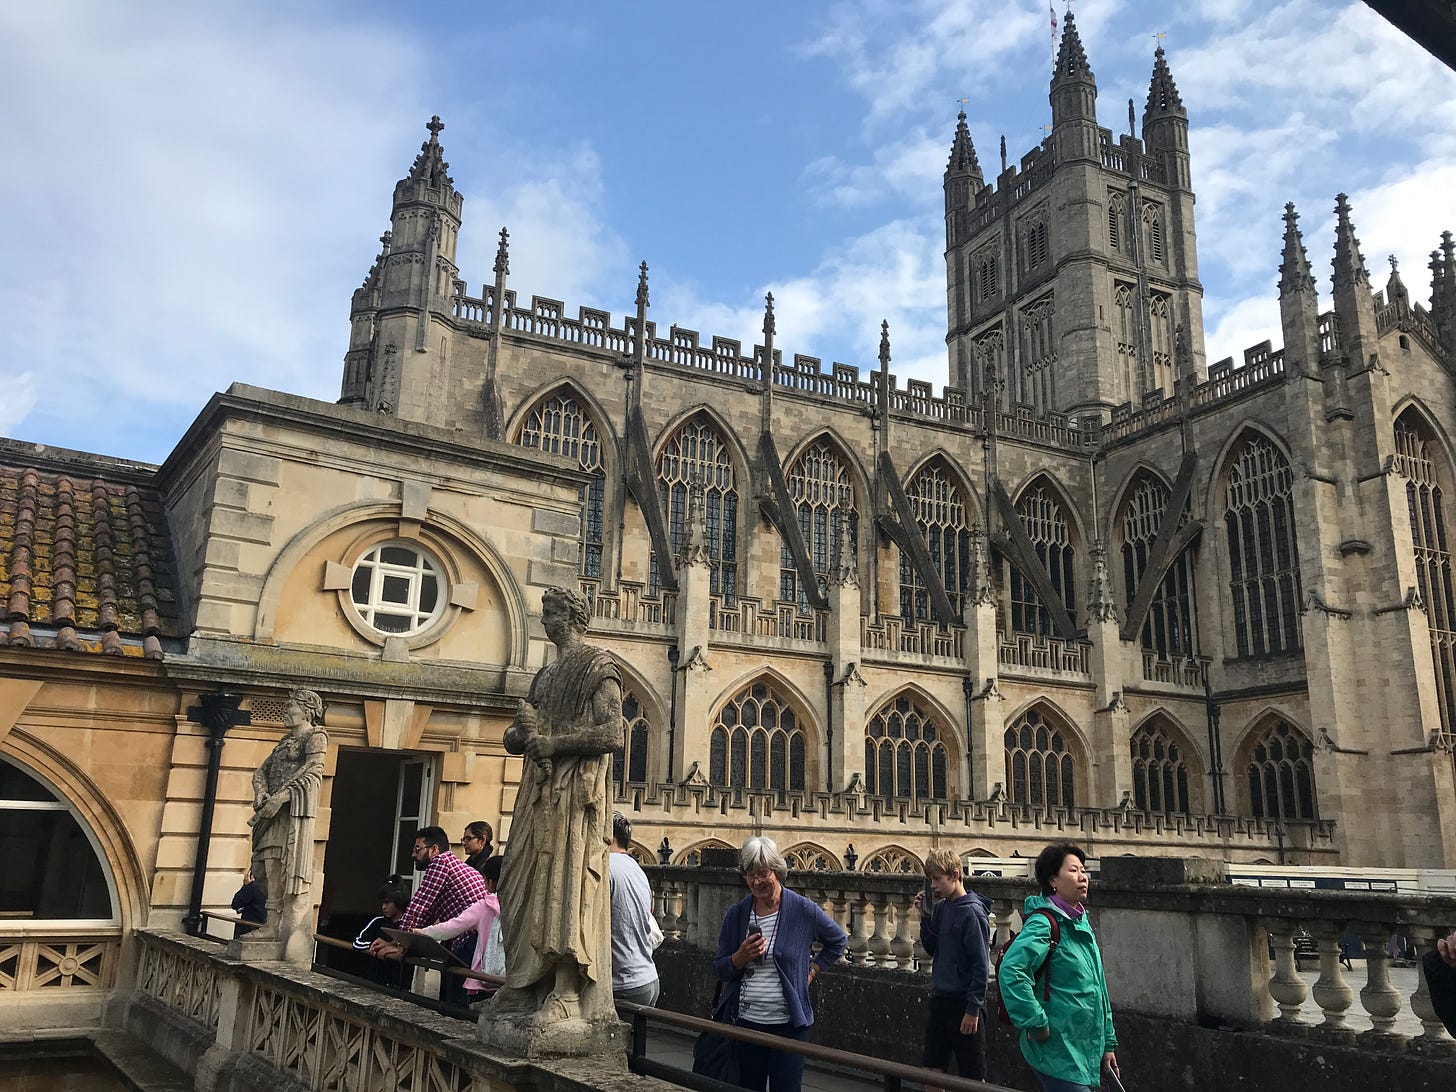 A view of Bath Abbey as seen from the Roman Baths. Image: Roland's Travels